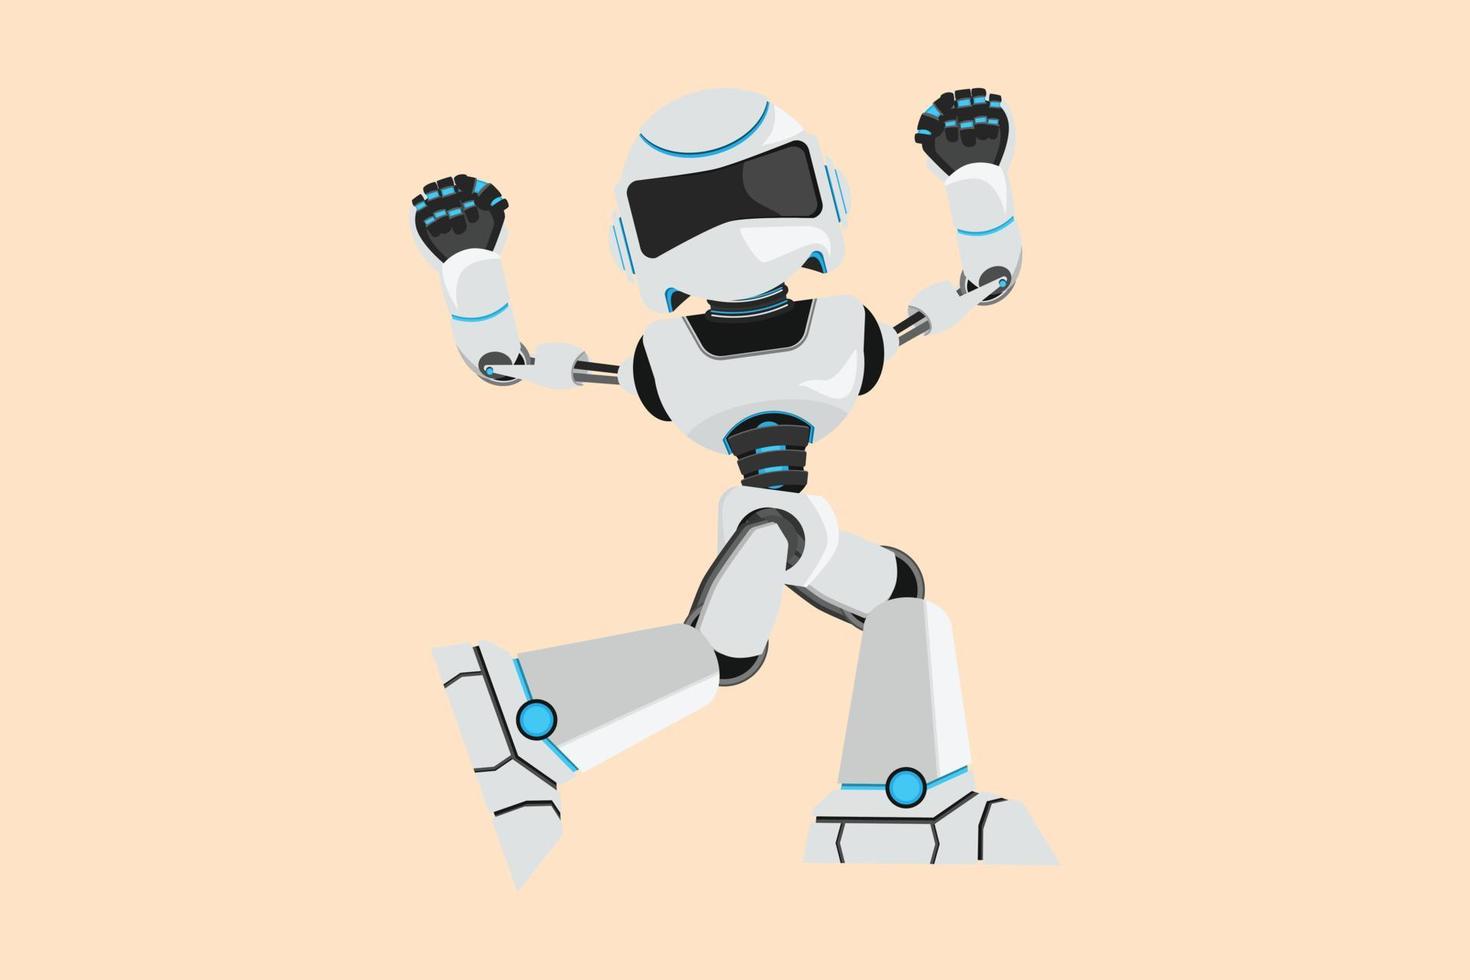 Business flat cartoon style drawing happy robot standing with raised his clenched fist hands. Modern robotic artificial intelligence. Electronic technology industry. Graphic design vector illustration